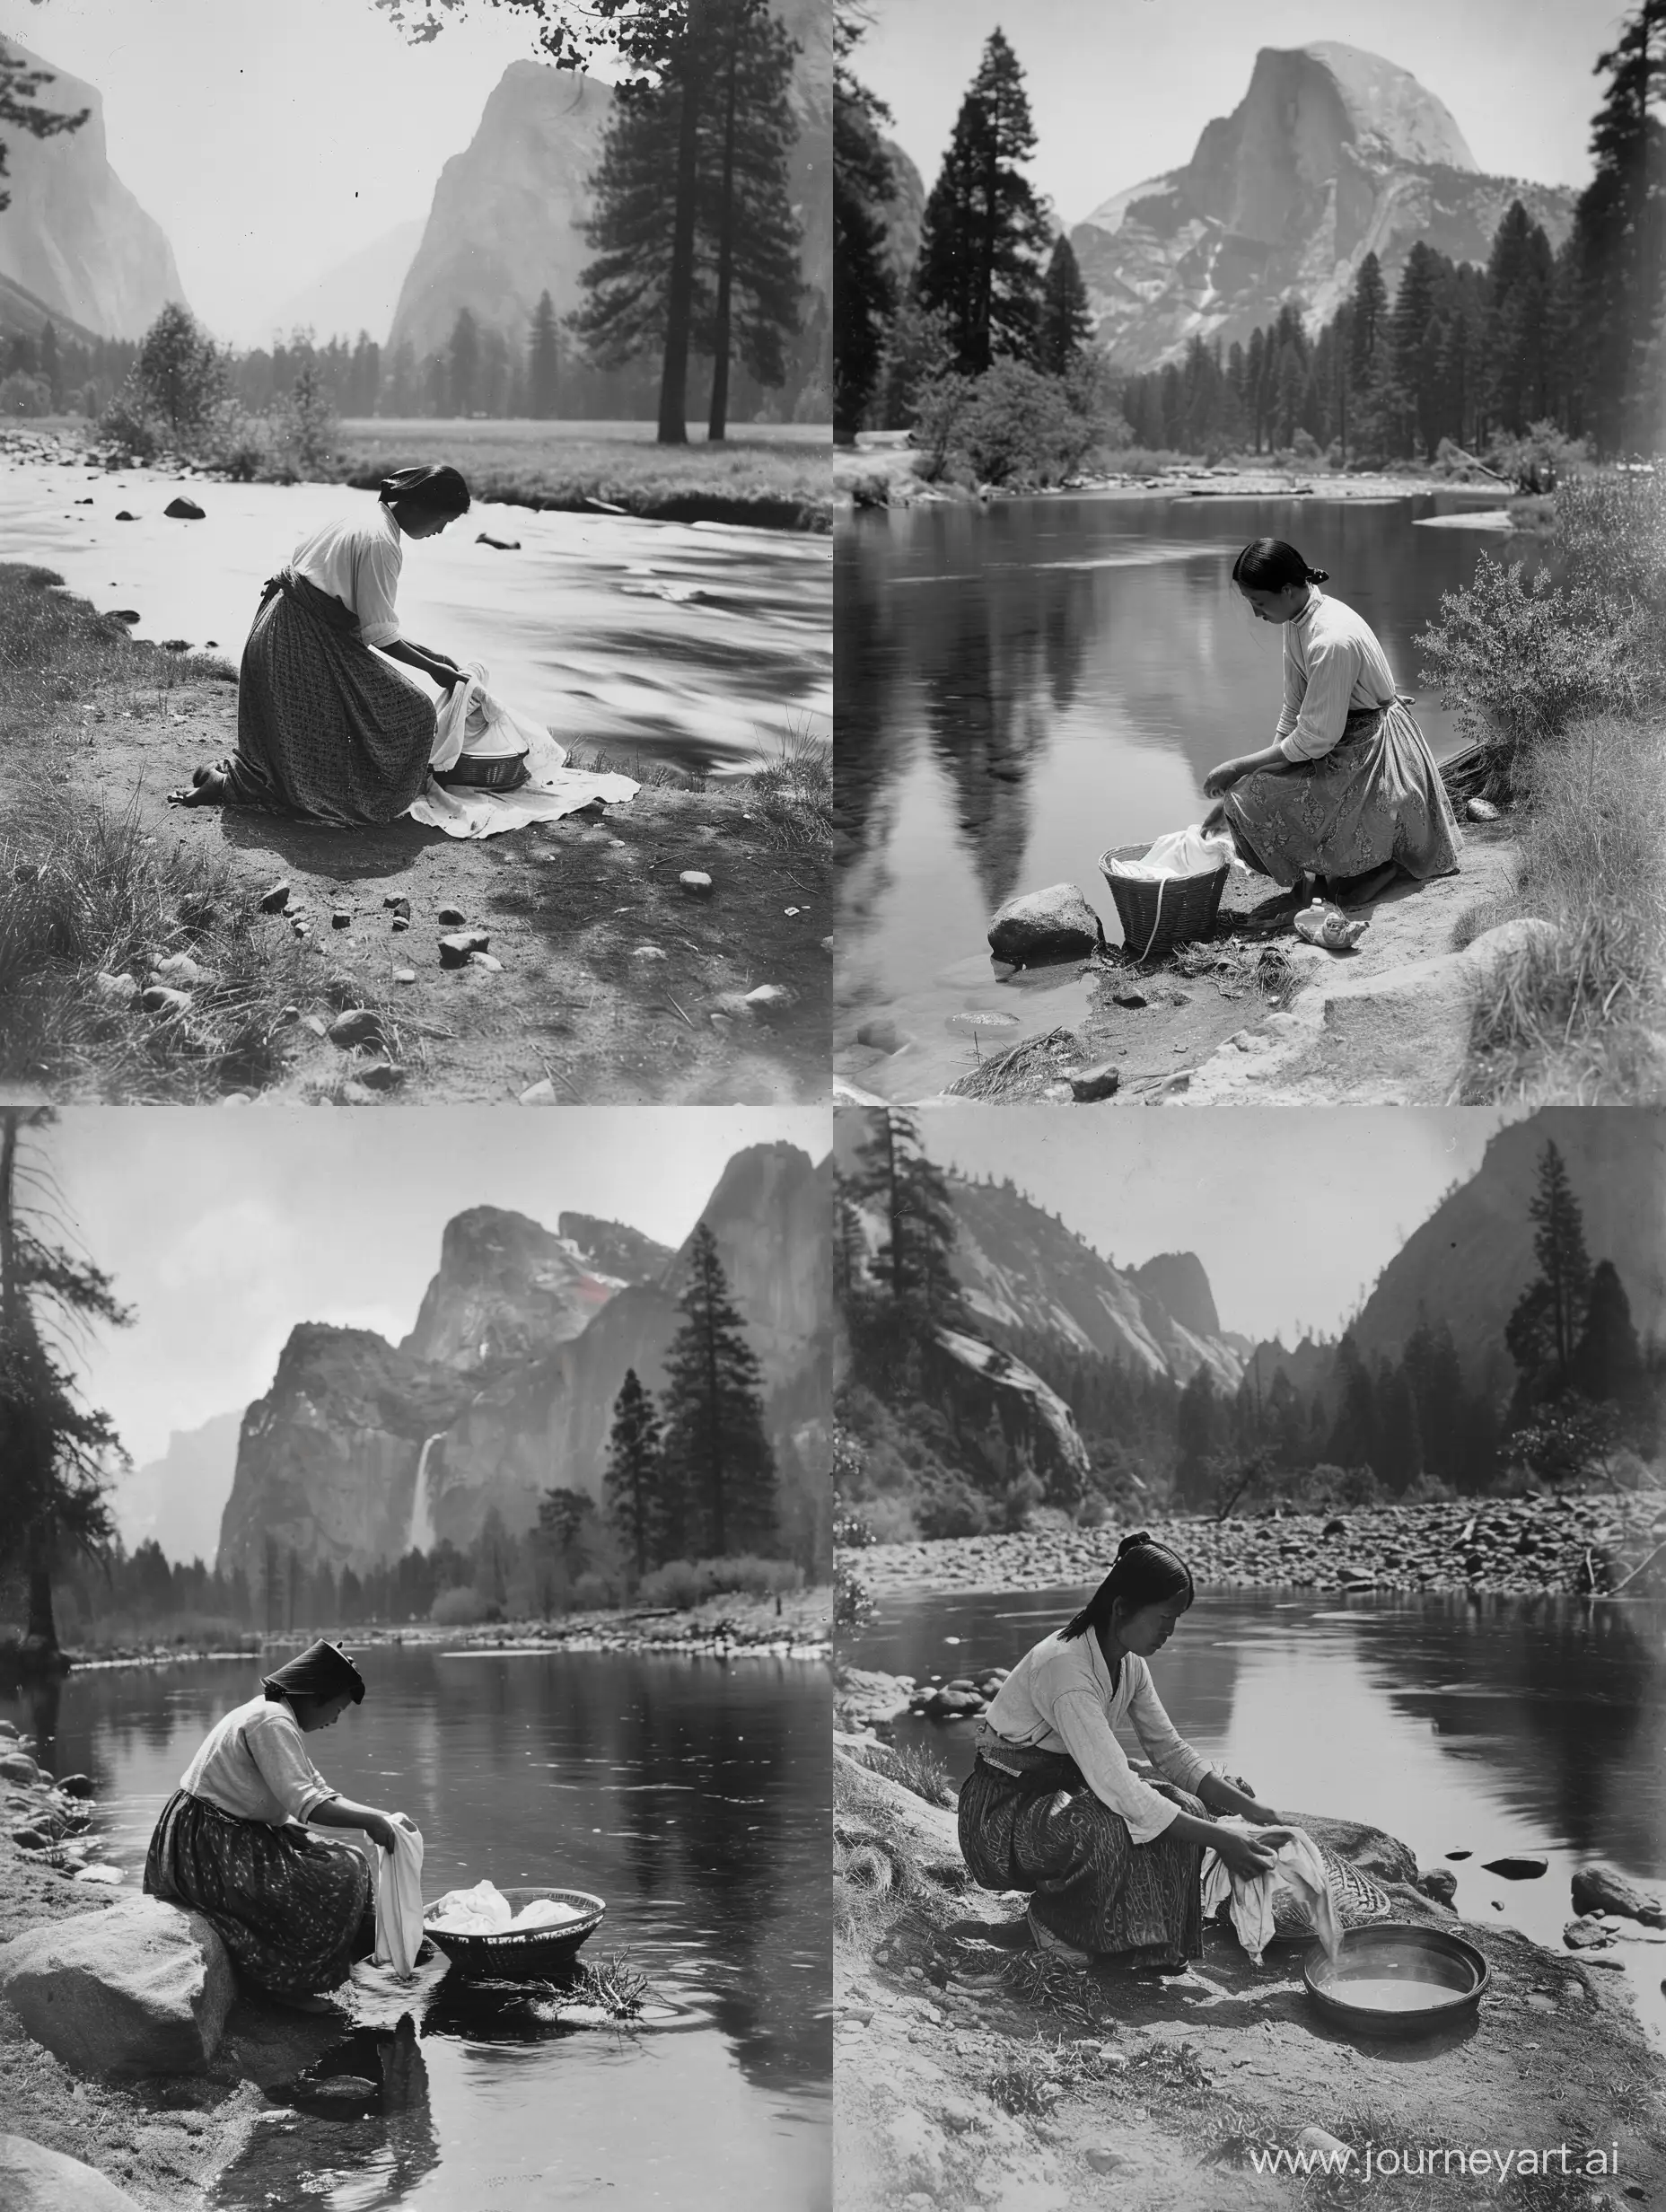 Chinese-Woman-Doing-Laundry-by-the-River-at-Yosemite-in-Late-1800s